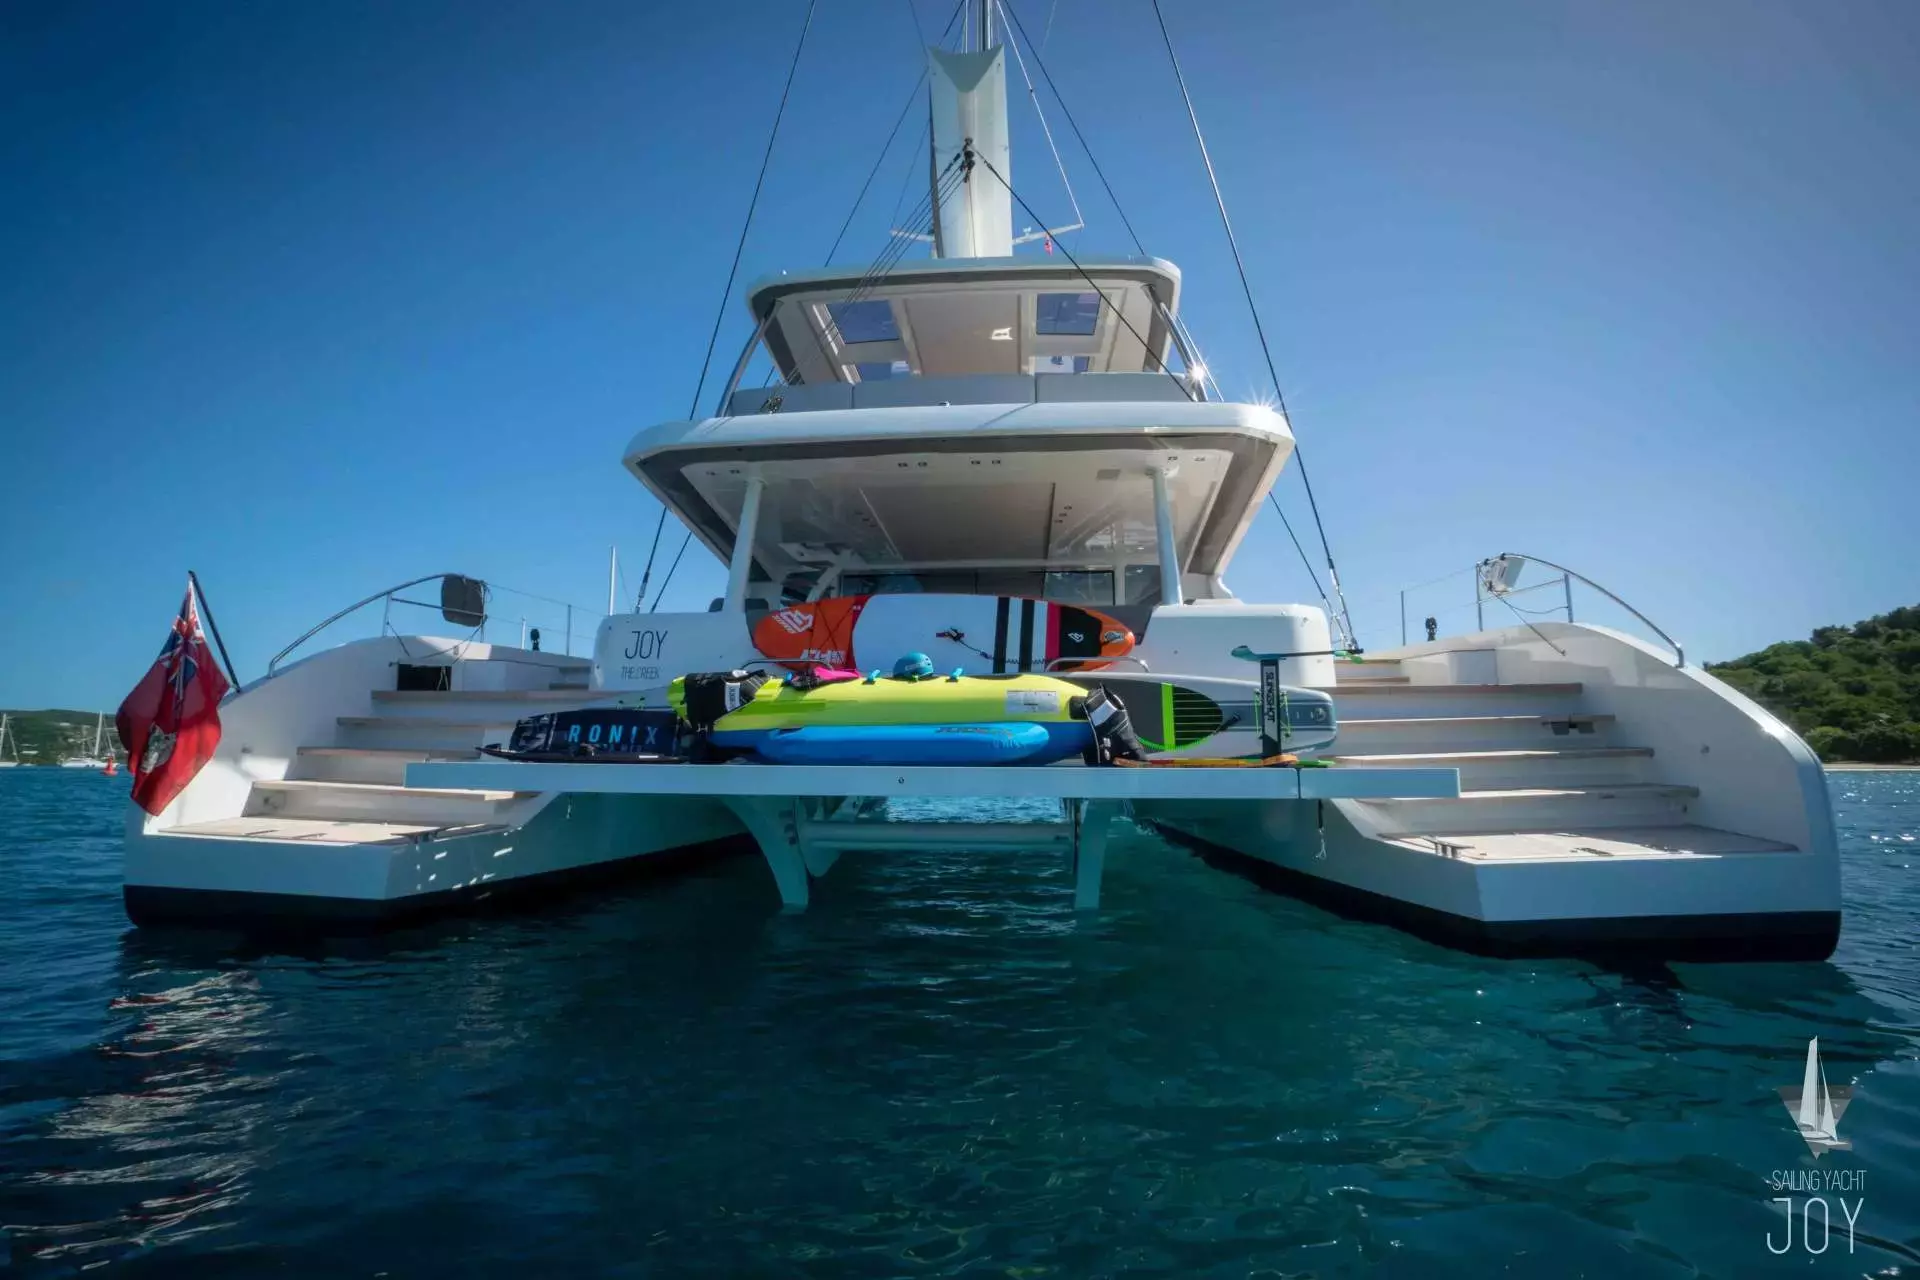 Joy II by Lagoon - Special Offer for a private Luxury Catamaran Charter in Bora Bora with a crew